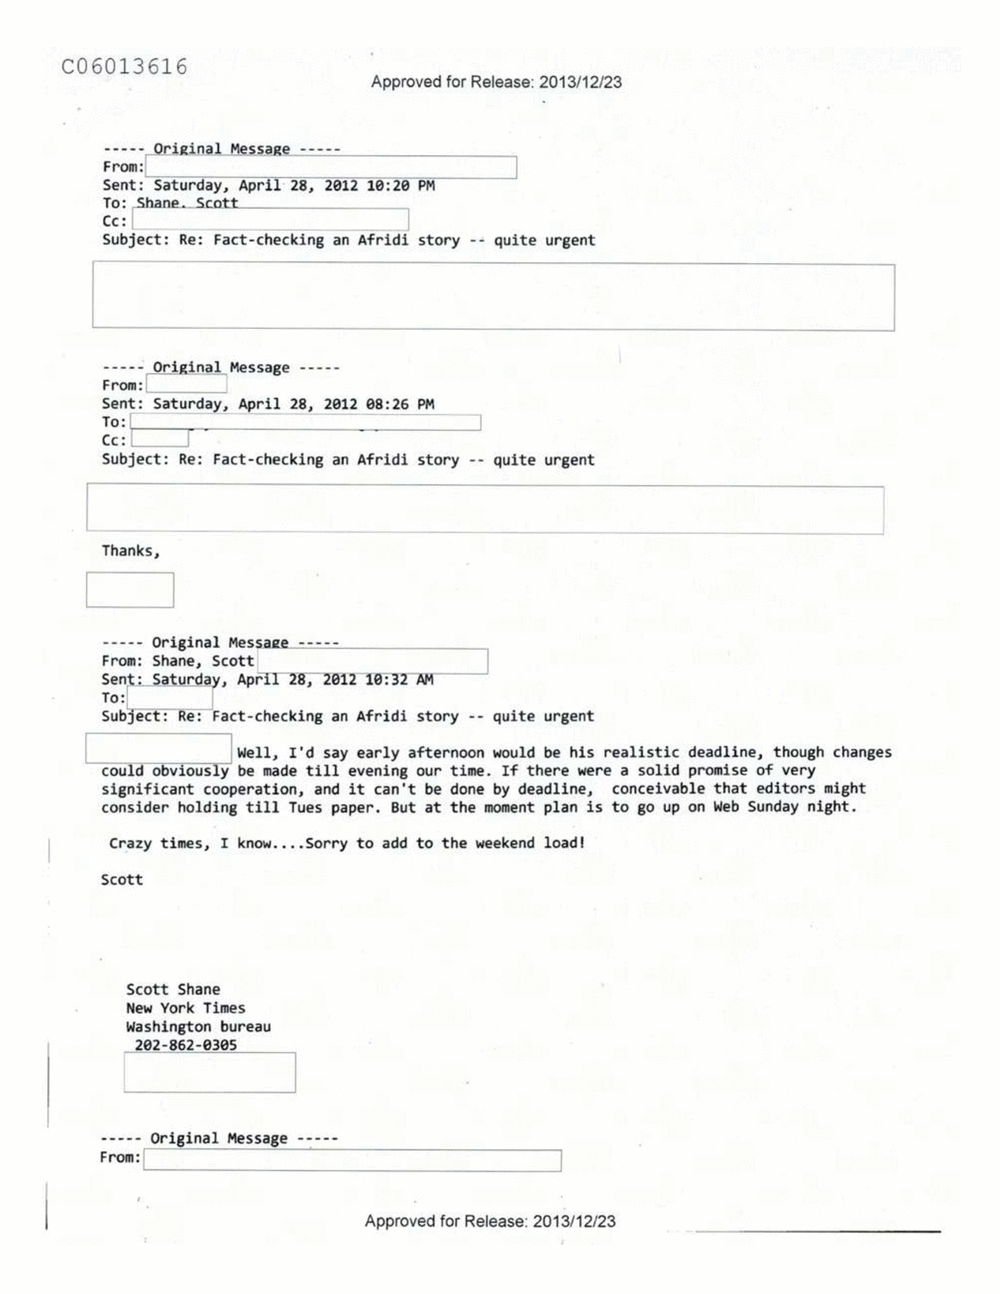 Page 442 from Email Correspondence Between Reporters and CIA Flacks